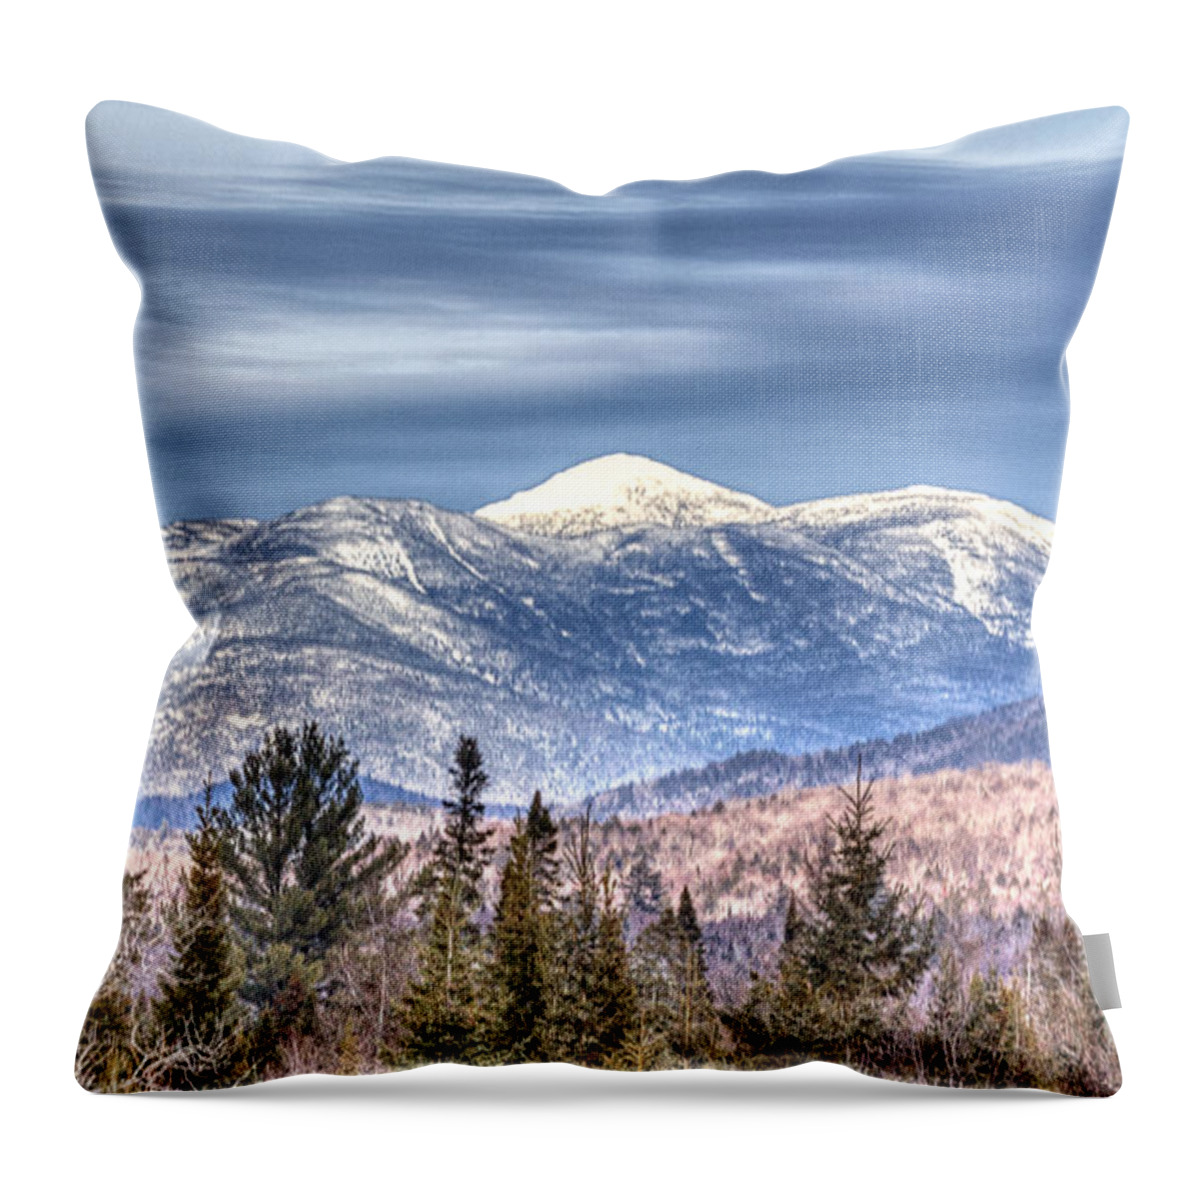 Adirondacks Throw Pillow featuring the photograph Adirondack High Peaks by Rod Best